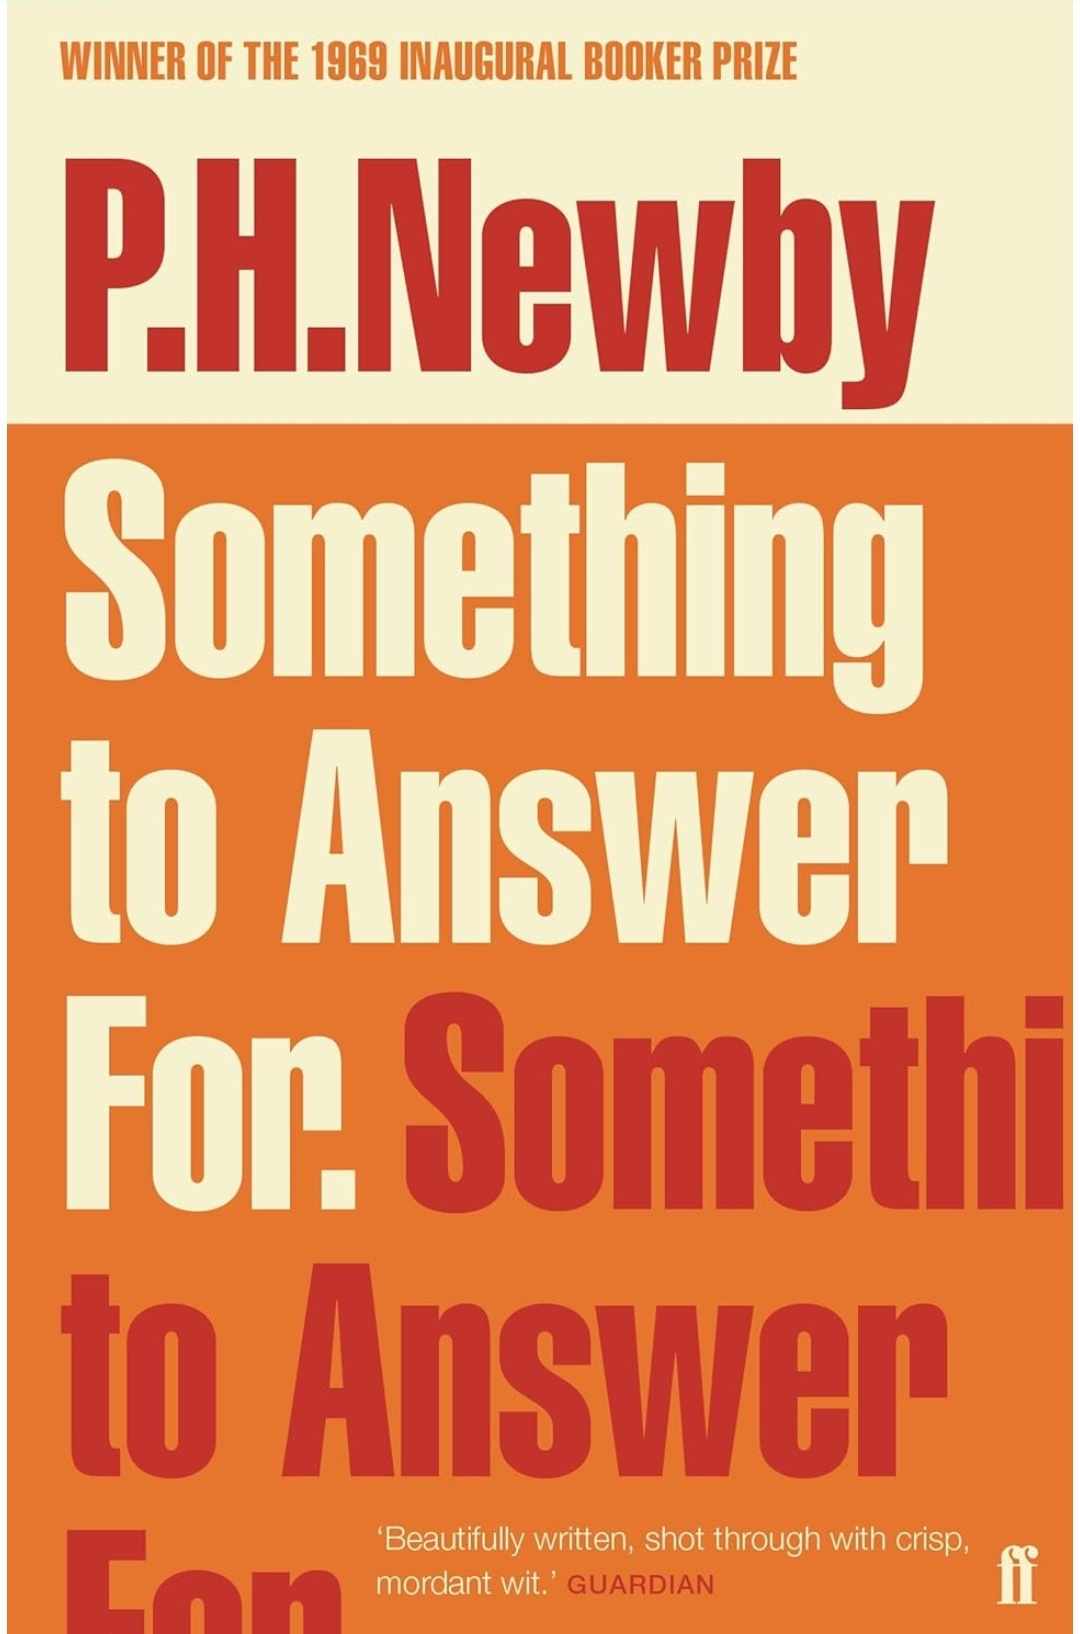 Something to Answer For by P.H. Newby